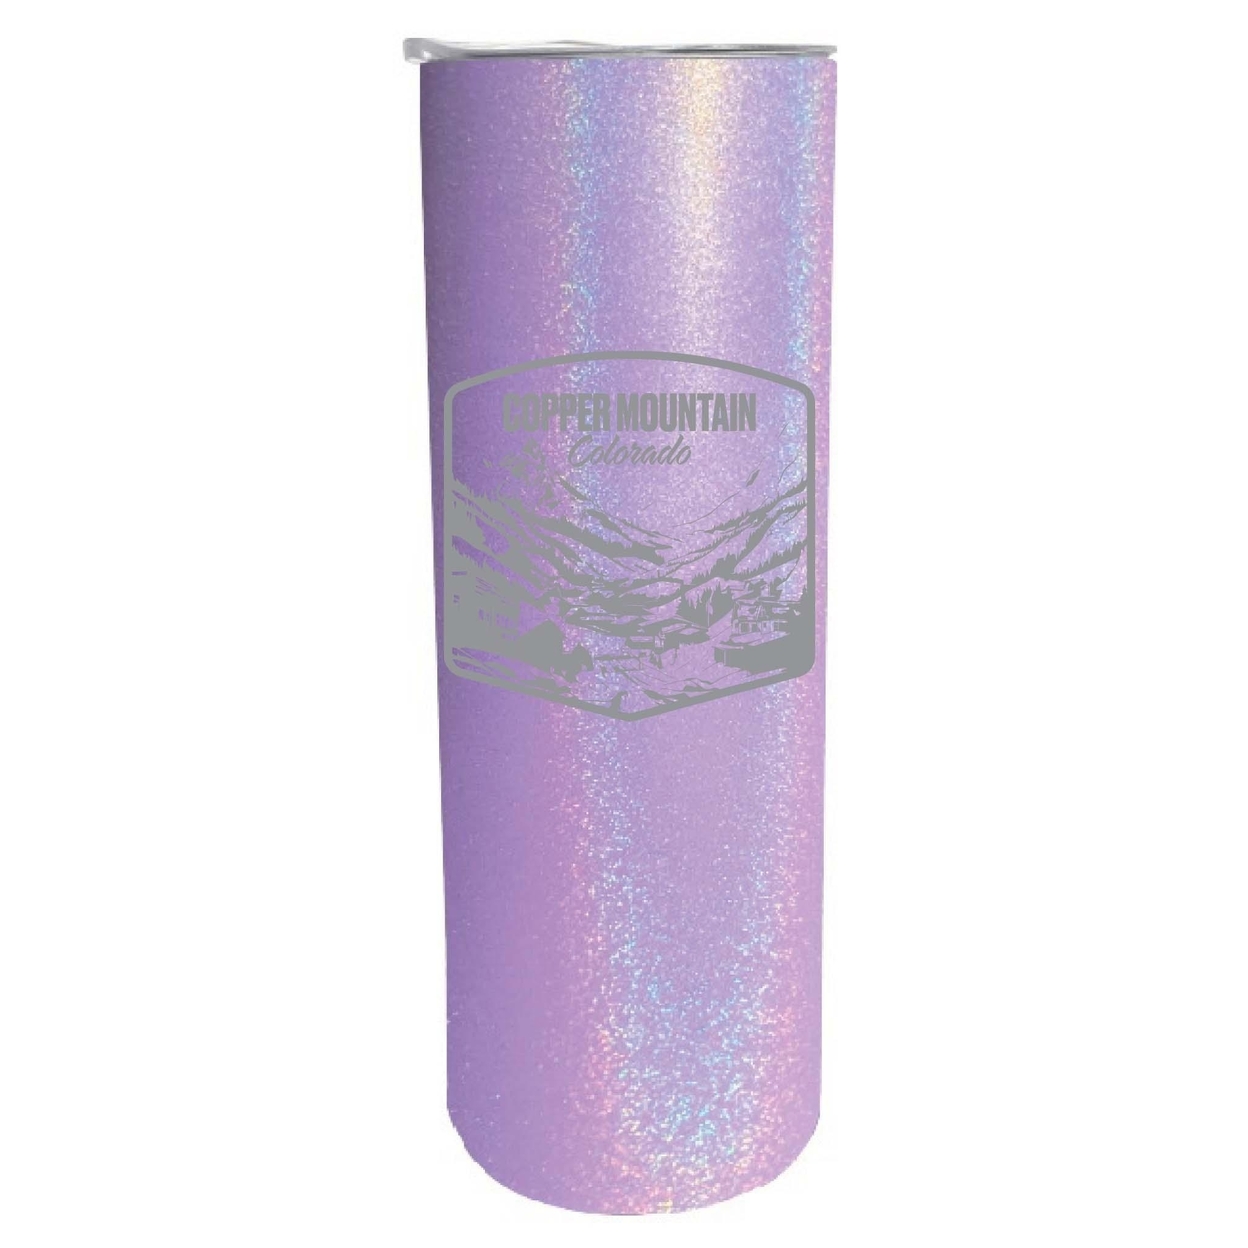 Copper Mountain Souvenir 20 Oz Engraved Insulated Skinny Tumbler - Navy,,2-Pack